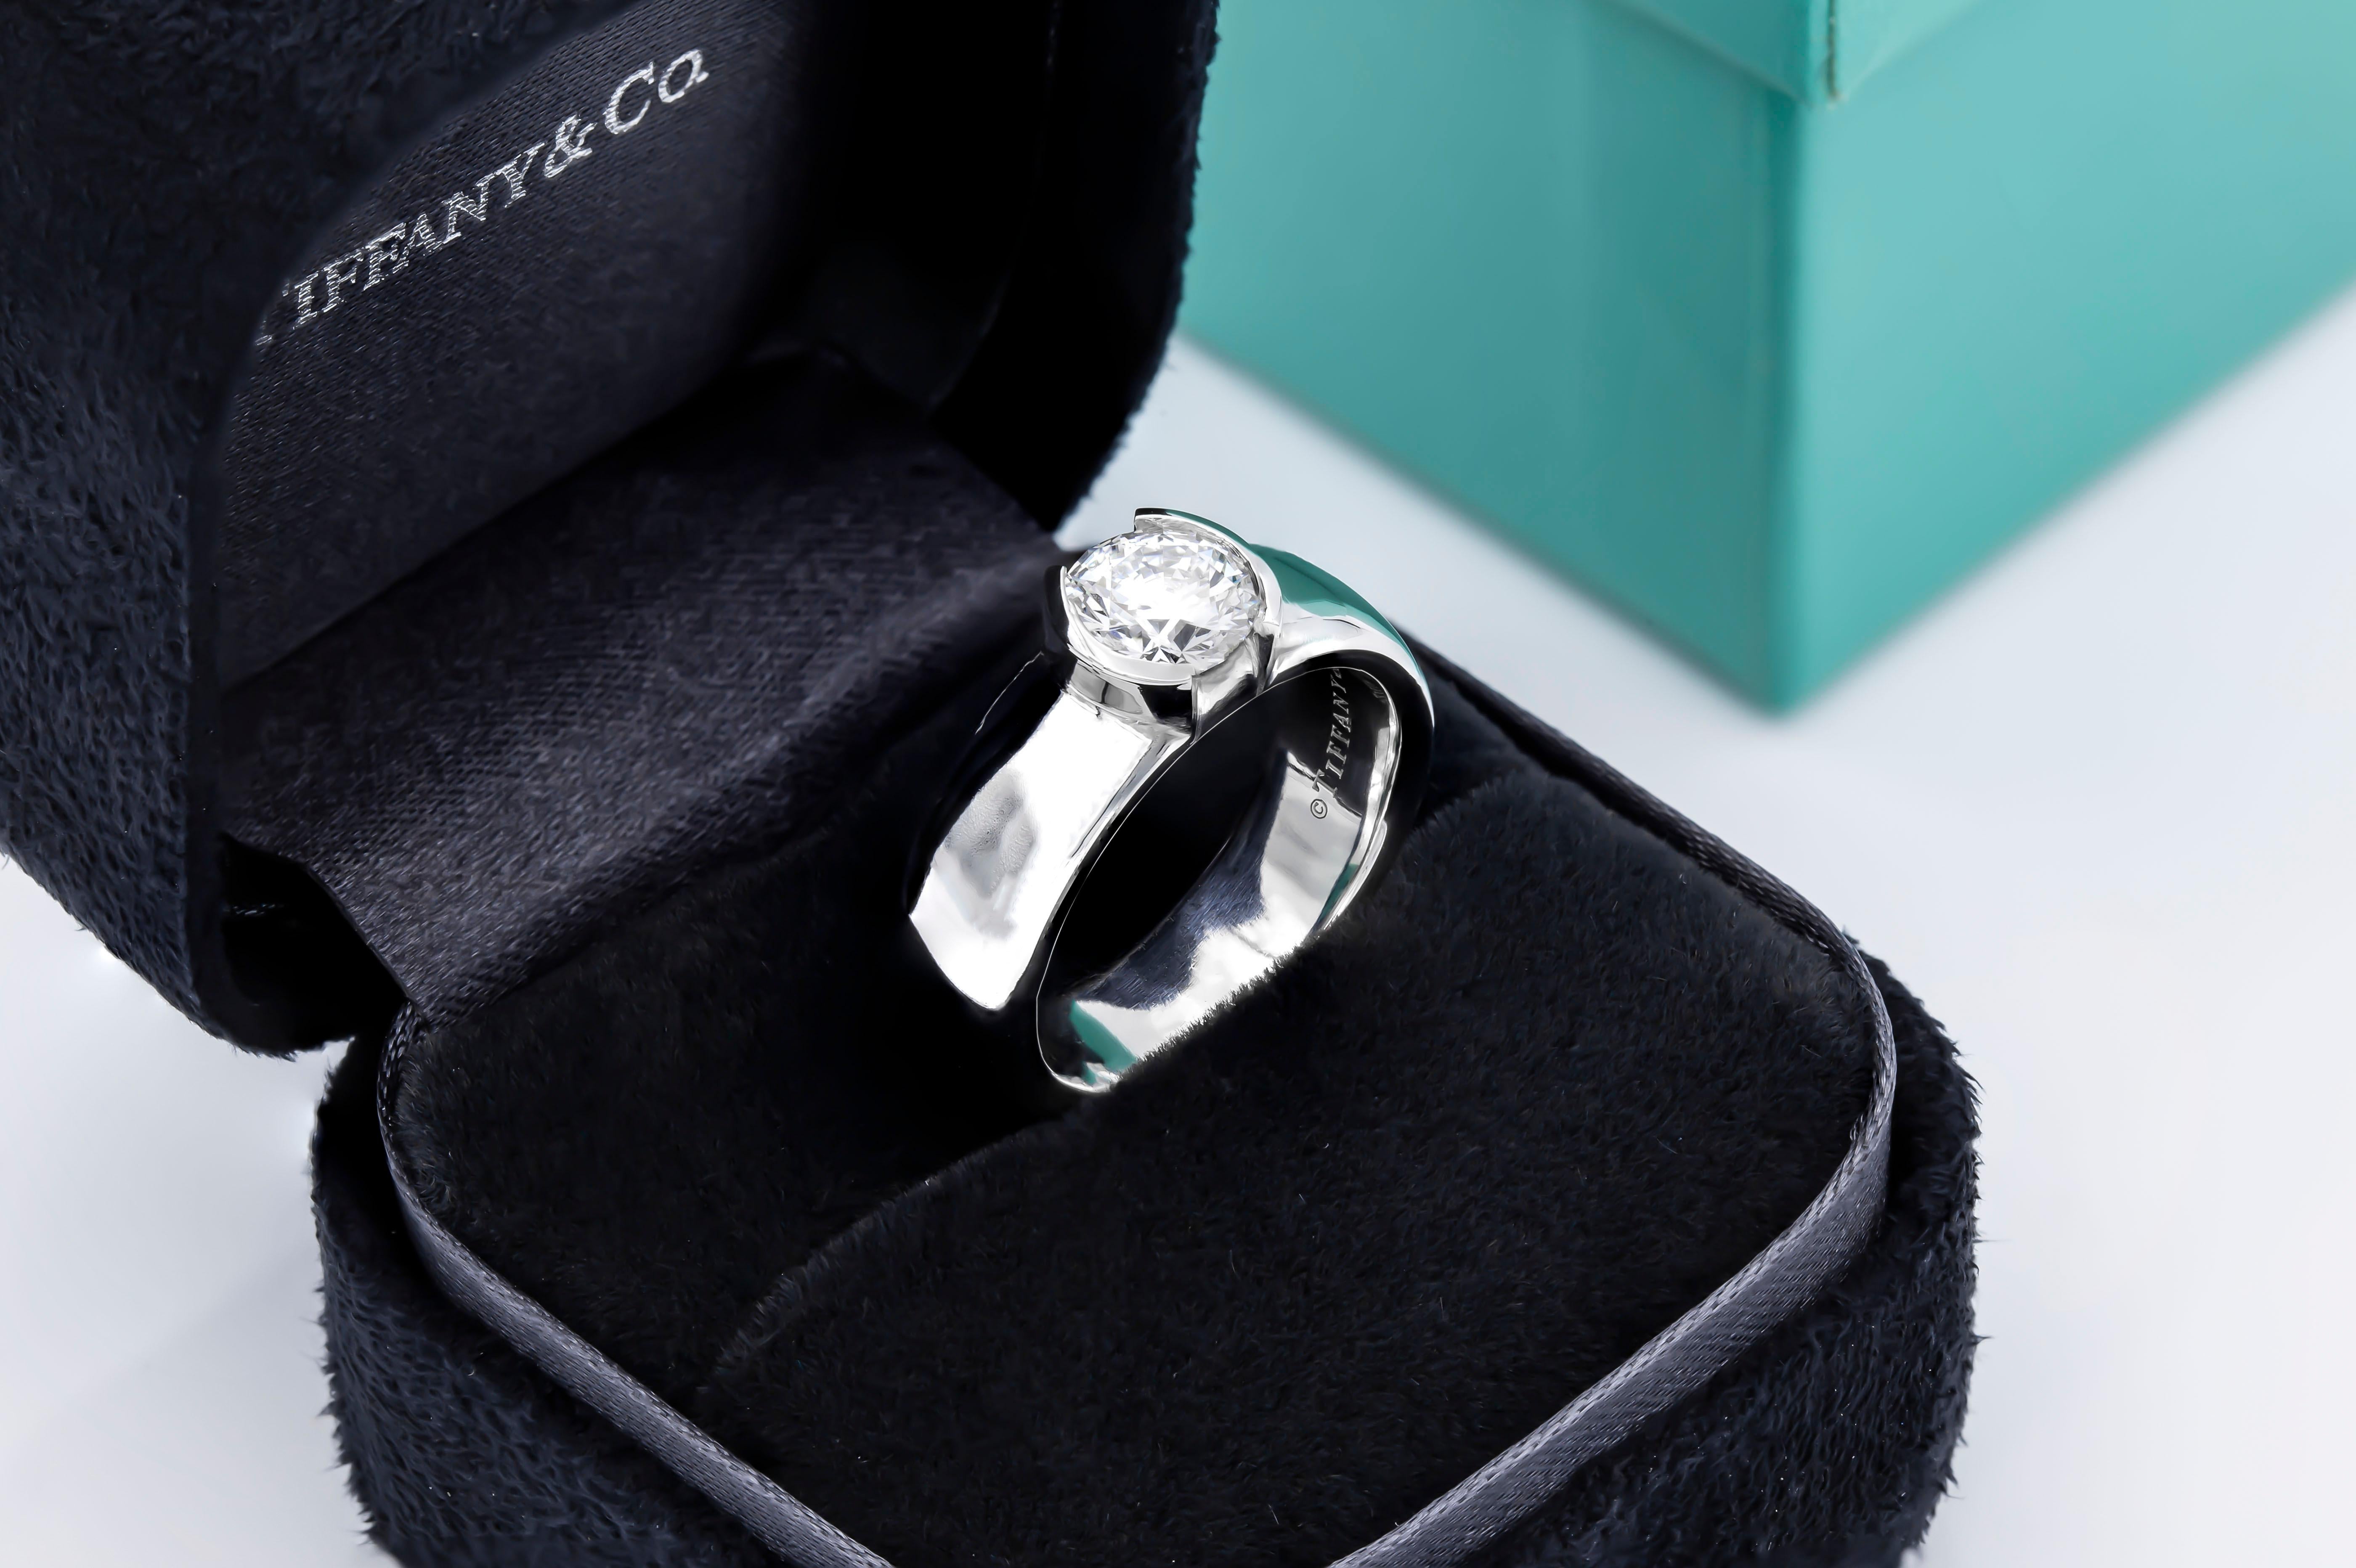 Tiffany & Co. Etoile Engagement ring in Platinum 950
Beautiful and timeless design!
With original Tiffany blue book
Center stone: 1.27ct E VVS1 Round Diam 
Measurements 7.03- 7.10 x 4.26 mm
Carat Weight: 1.27 carat
Color Grade E
Clarity Grade